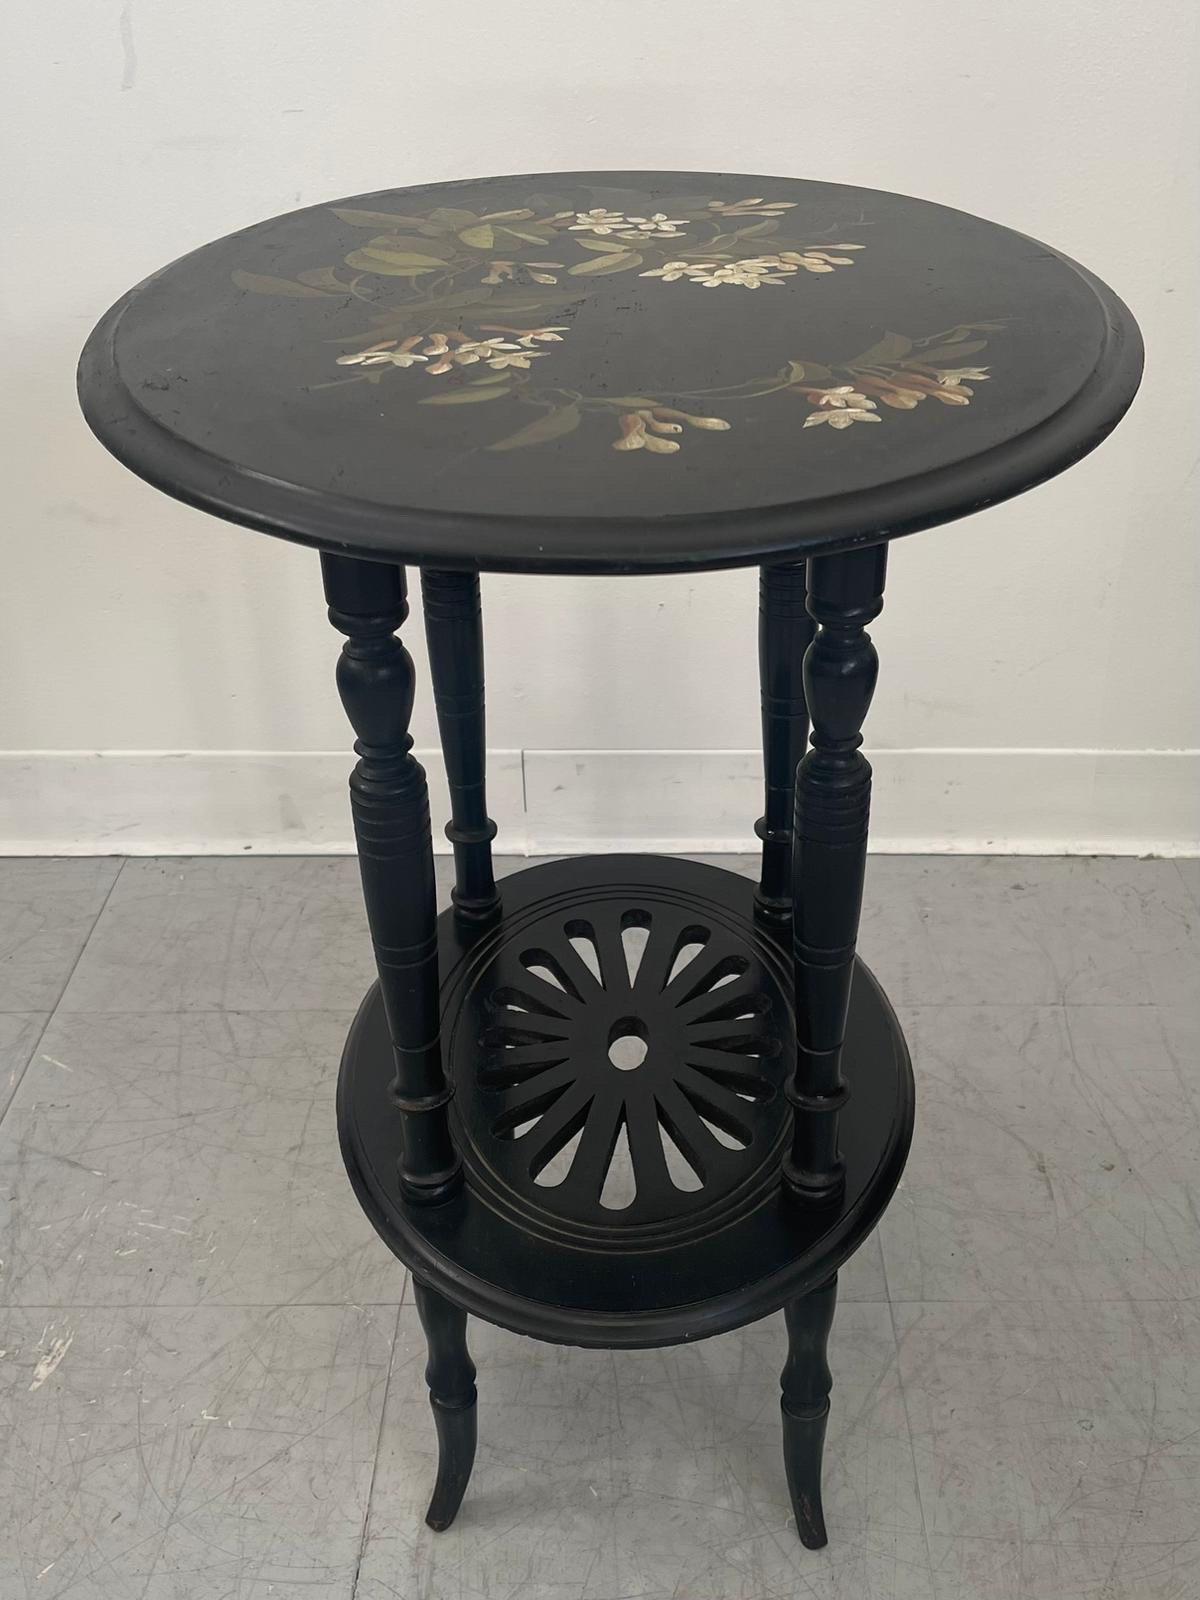 Imported Decorative Table with Floral Motif on the Top. The Second Shelf of the Table has a Floral Cut Out Pattern. The Legs have Unique Carving. No Makers Mark. Vintage Condition Consistent with Age as Pictured.

Dimensions. 21 1/2 W ; 17 D ; 25 H